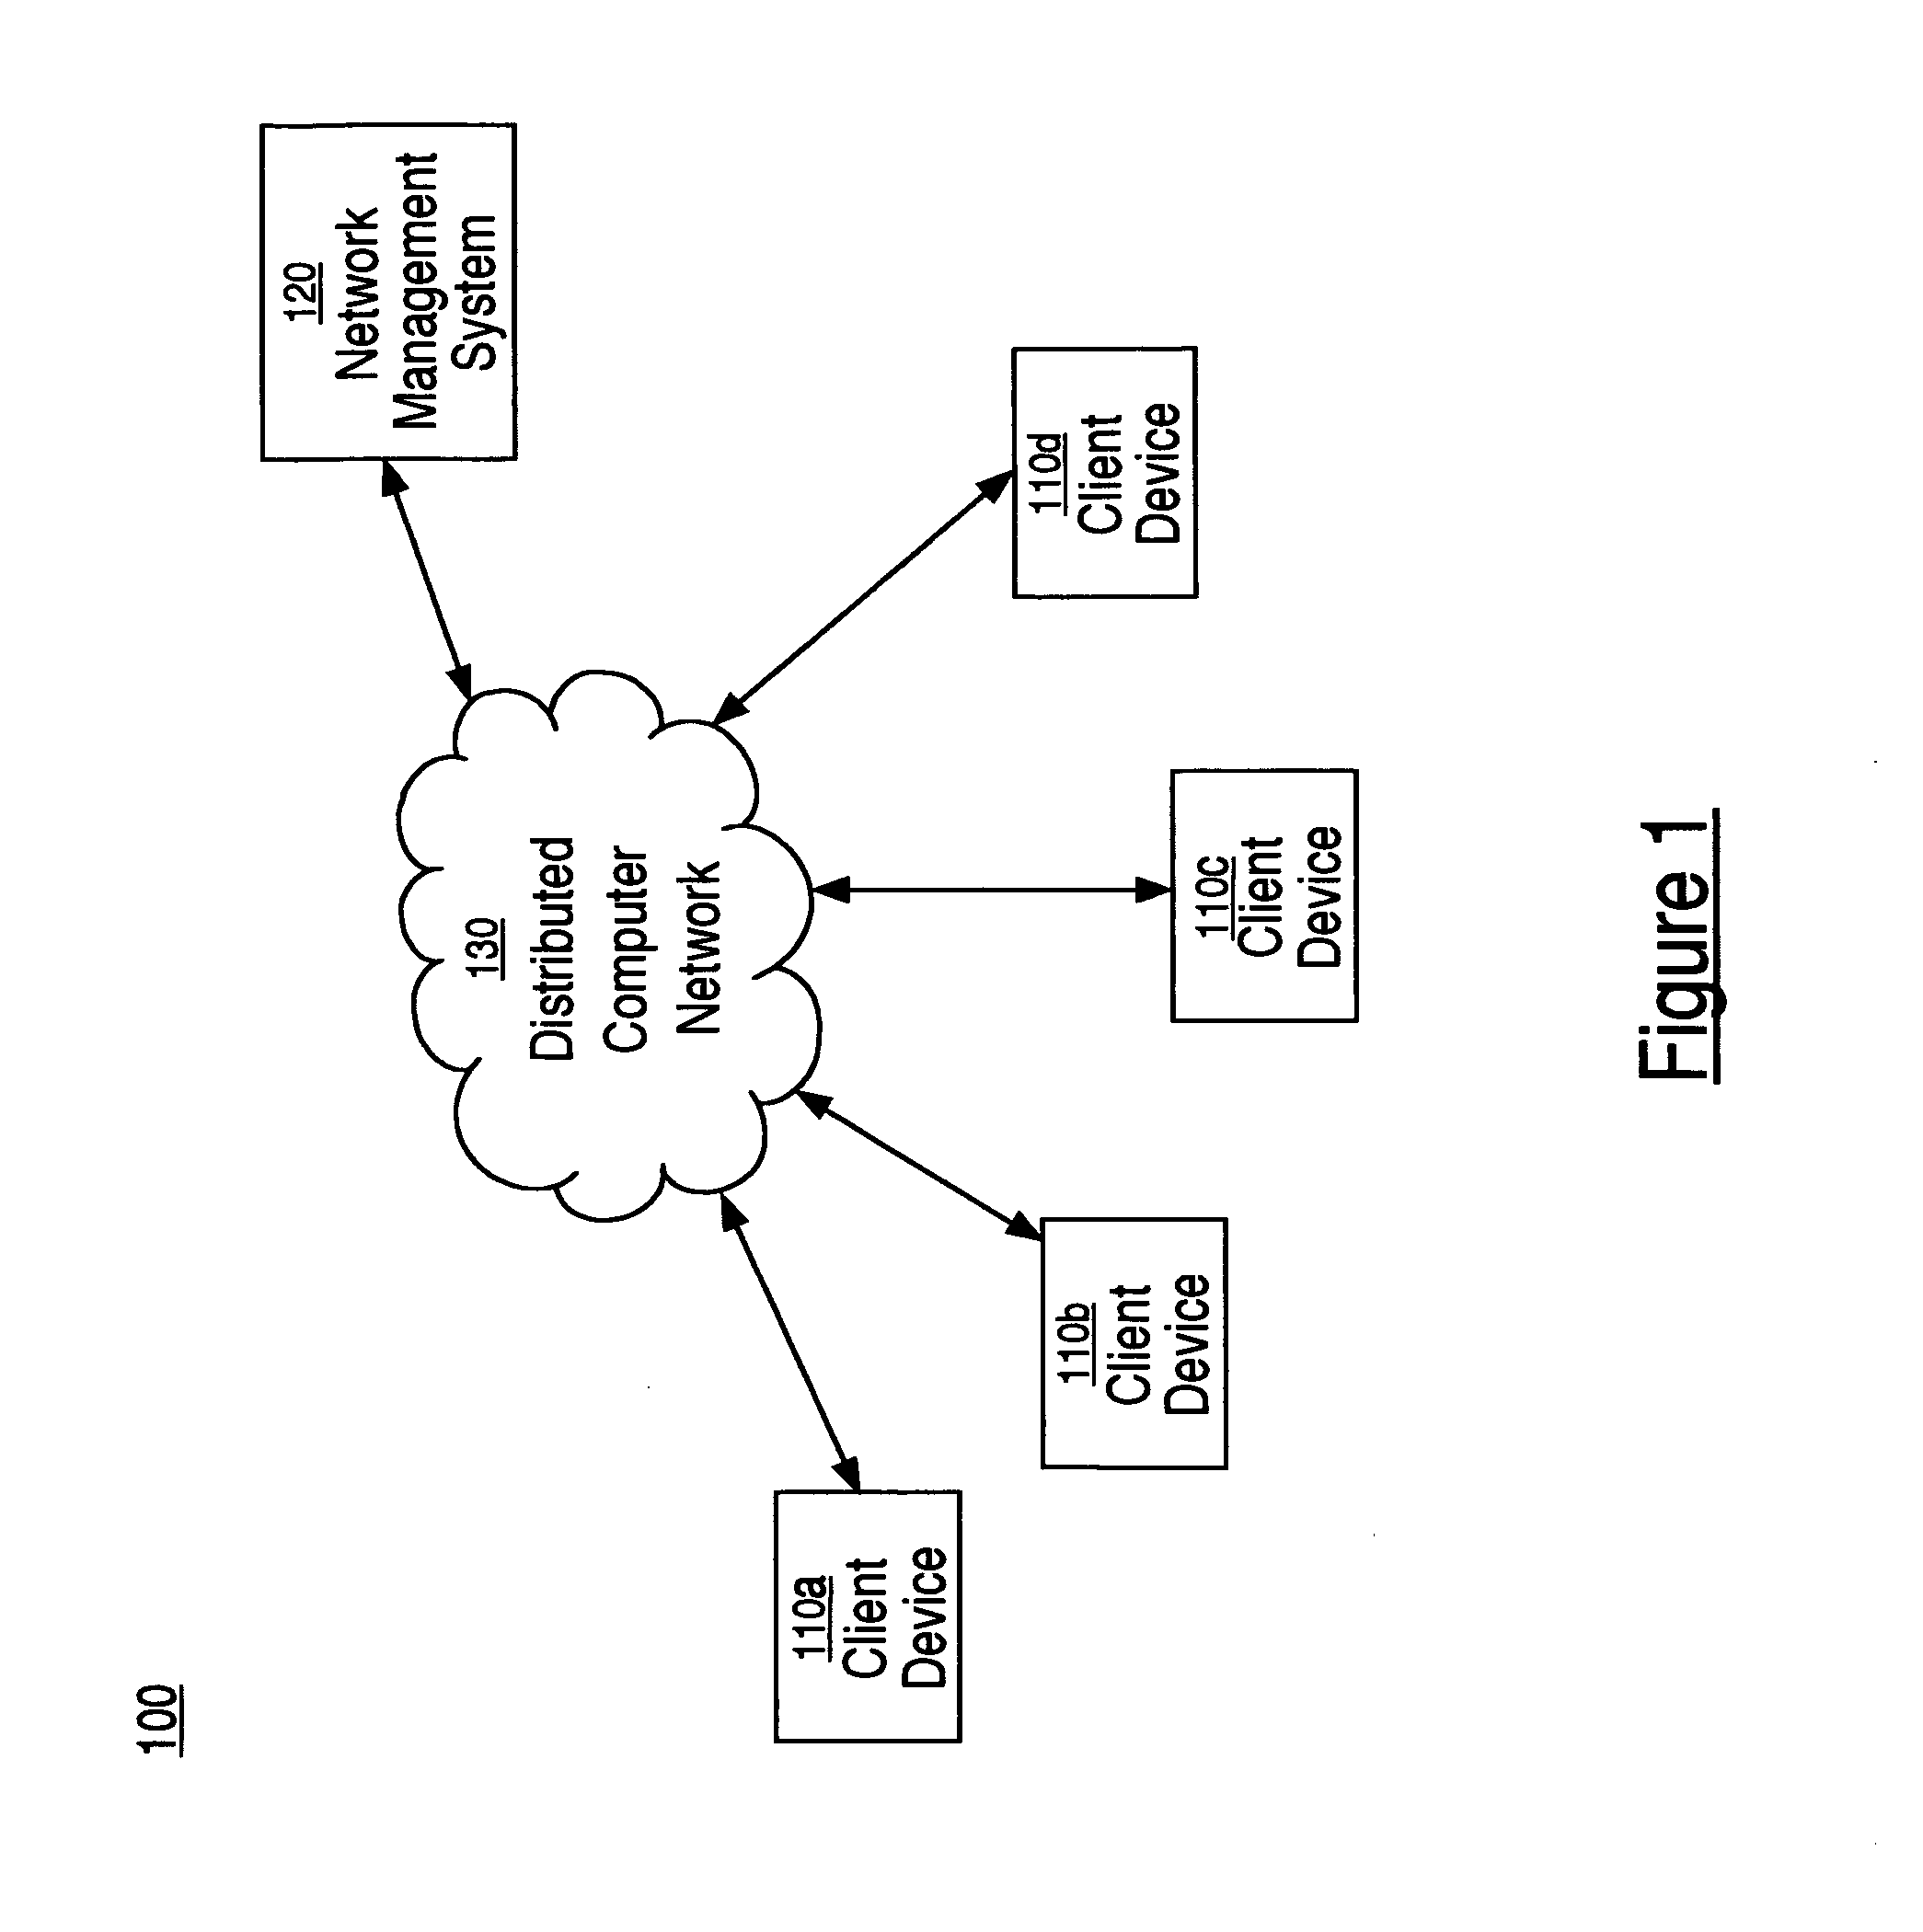 Method and system for event-driven network management